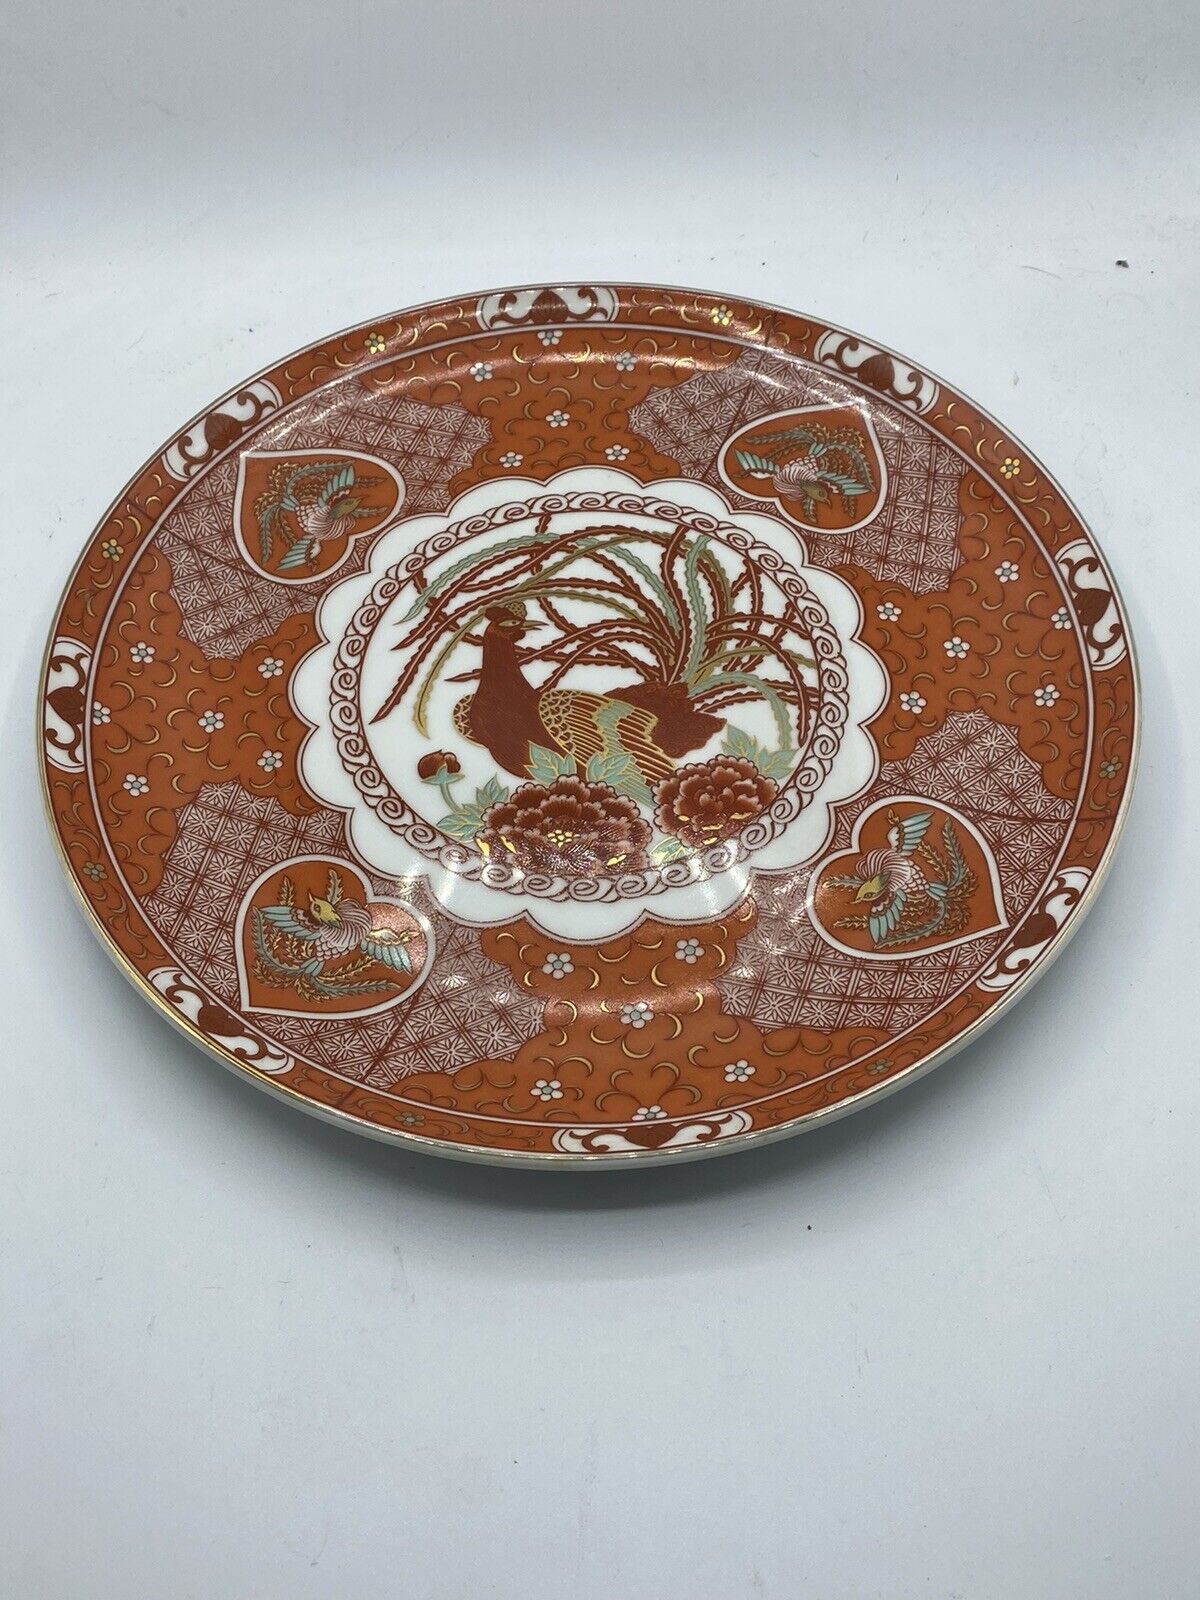 Vintage Red Coral Peacock Japanese Plater Plate Dish Serving Dish M382 12.5”